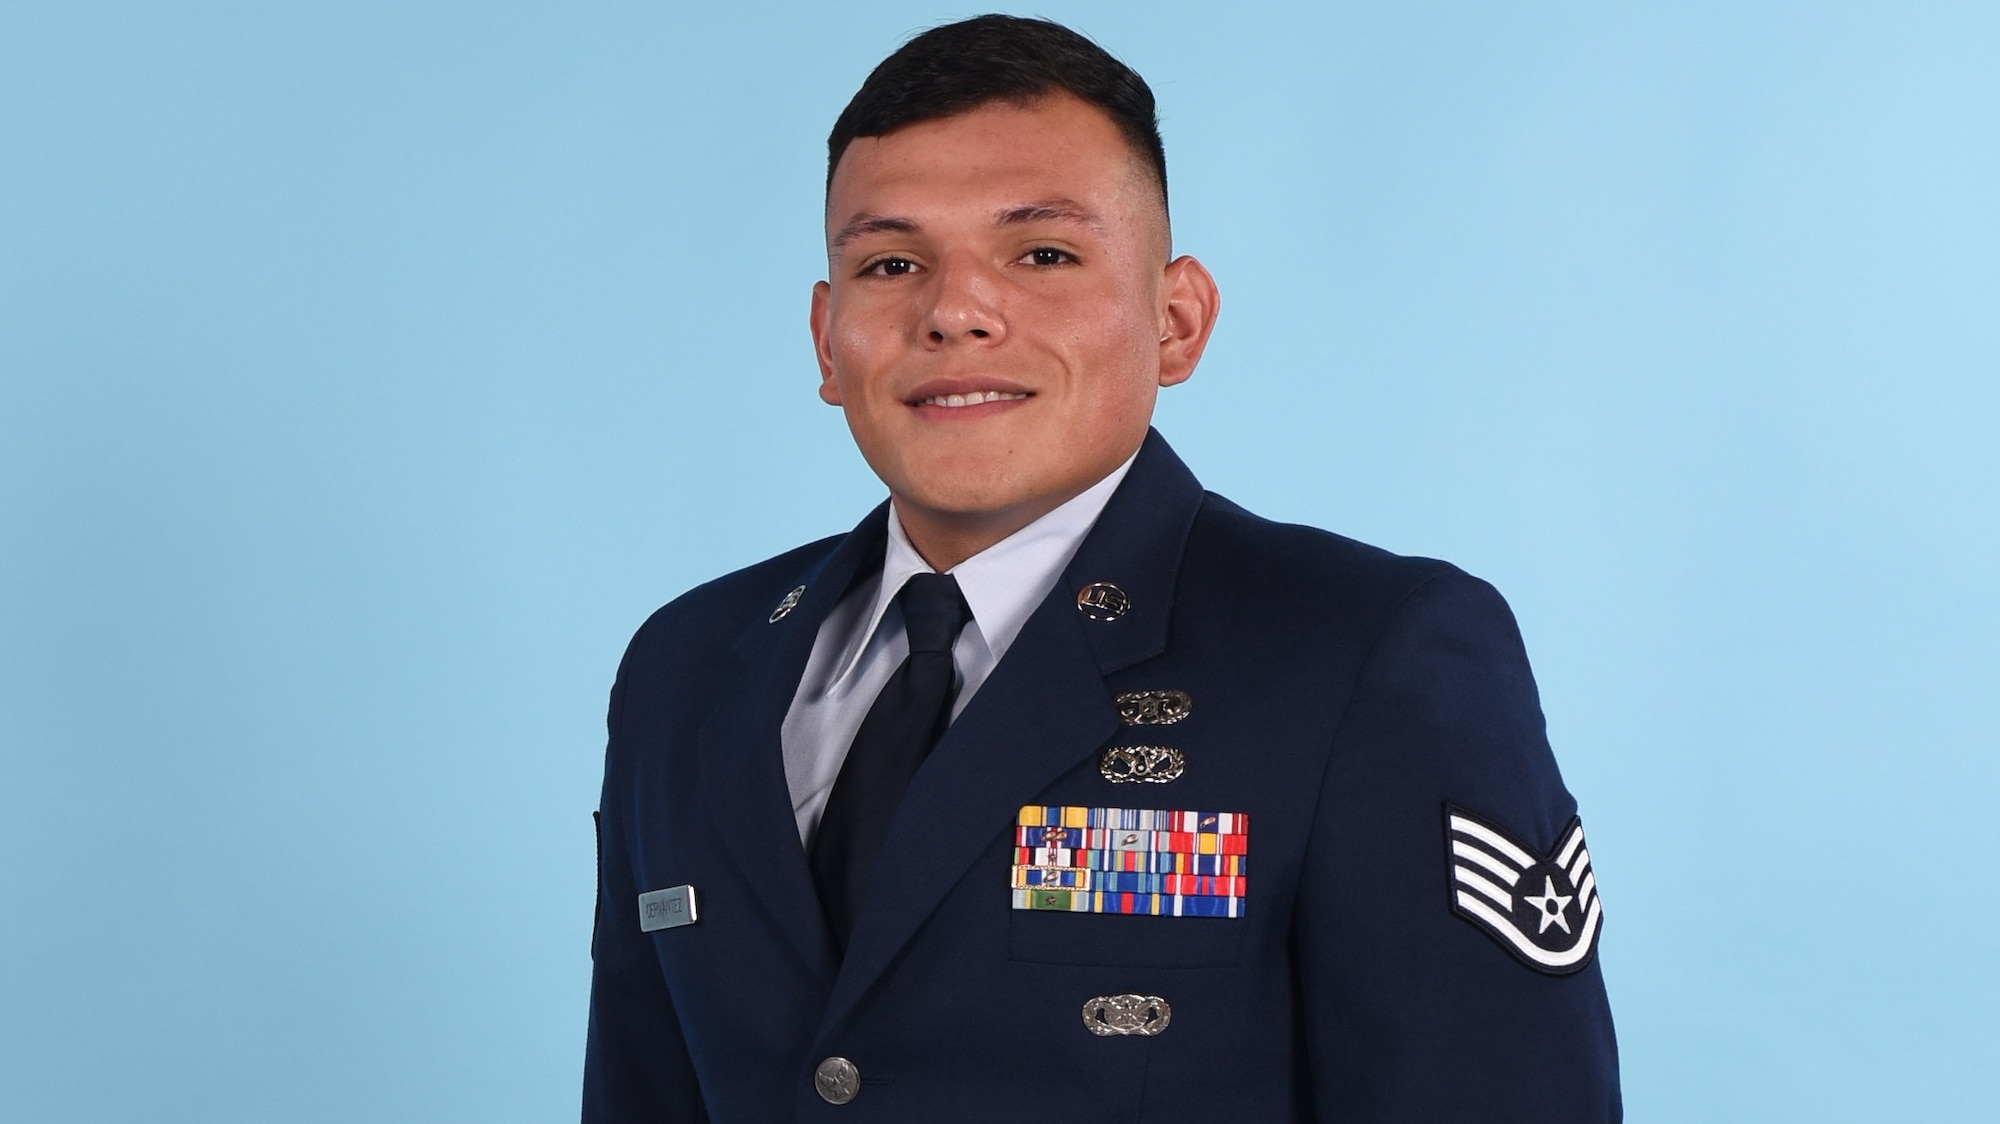 U.S. Air Force Staff Sgt. Samuel Cervantez, 17th Civil Engineer non-commissioned officer in charge of plans and operations for the Office of Emergency Management, poses for an official photo on Goodfellow Air Force Base, Texas, July 27, 2021. Cervantez will attend the University of Oklahoma for the Senior Leader Enlisted Commissioning Program. He will then go to Maxwell Air Force Base, Ala. for Officer Training School. (U.S. Air Force photo by Staff Sgt. Jermaine Ayers)